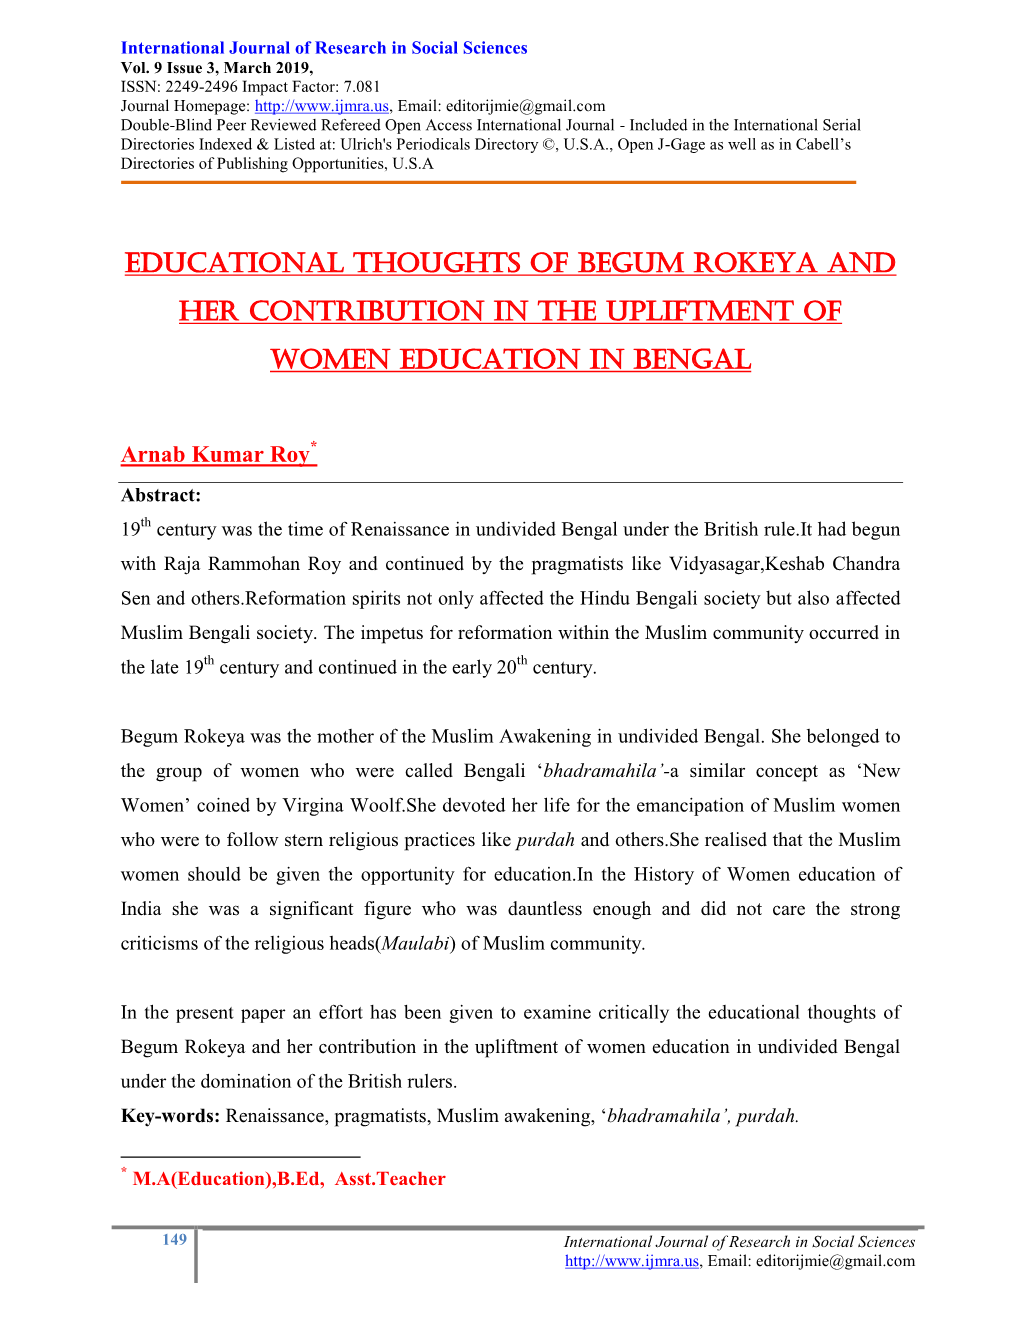 Educational Thoughts of Begum Rokeya and Her Contribution in the Upliftment of Women Education in Bengal